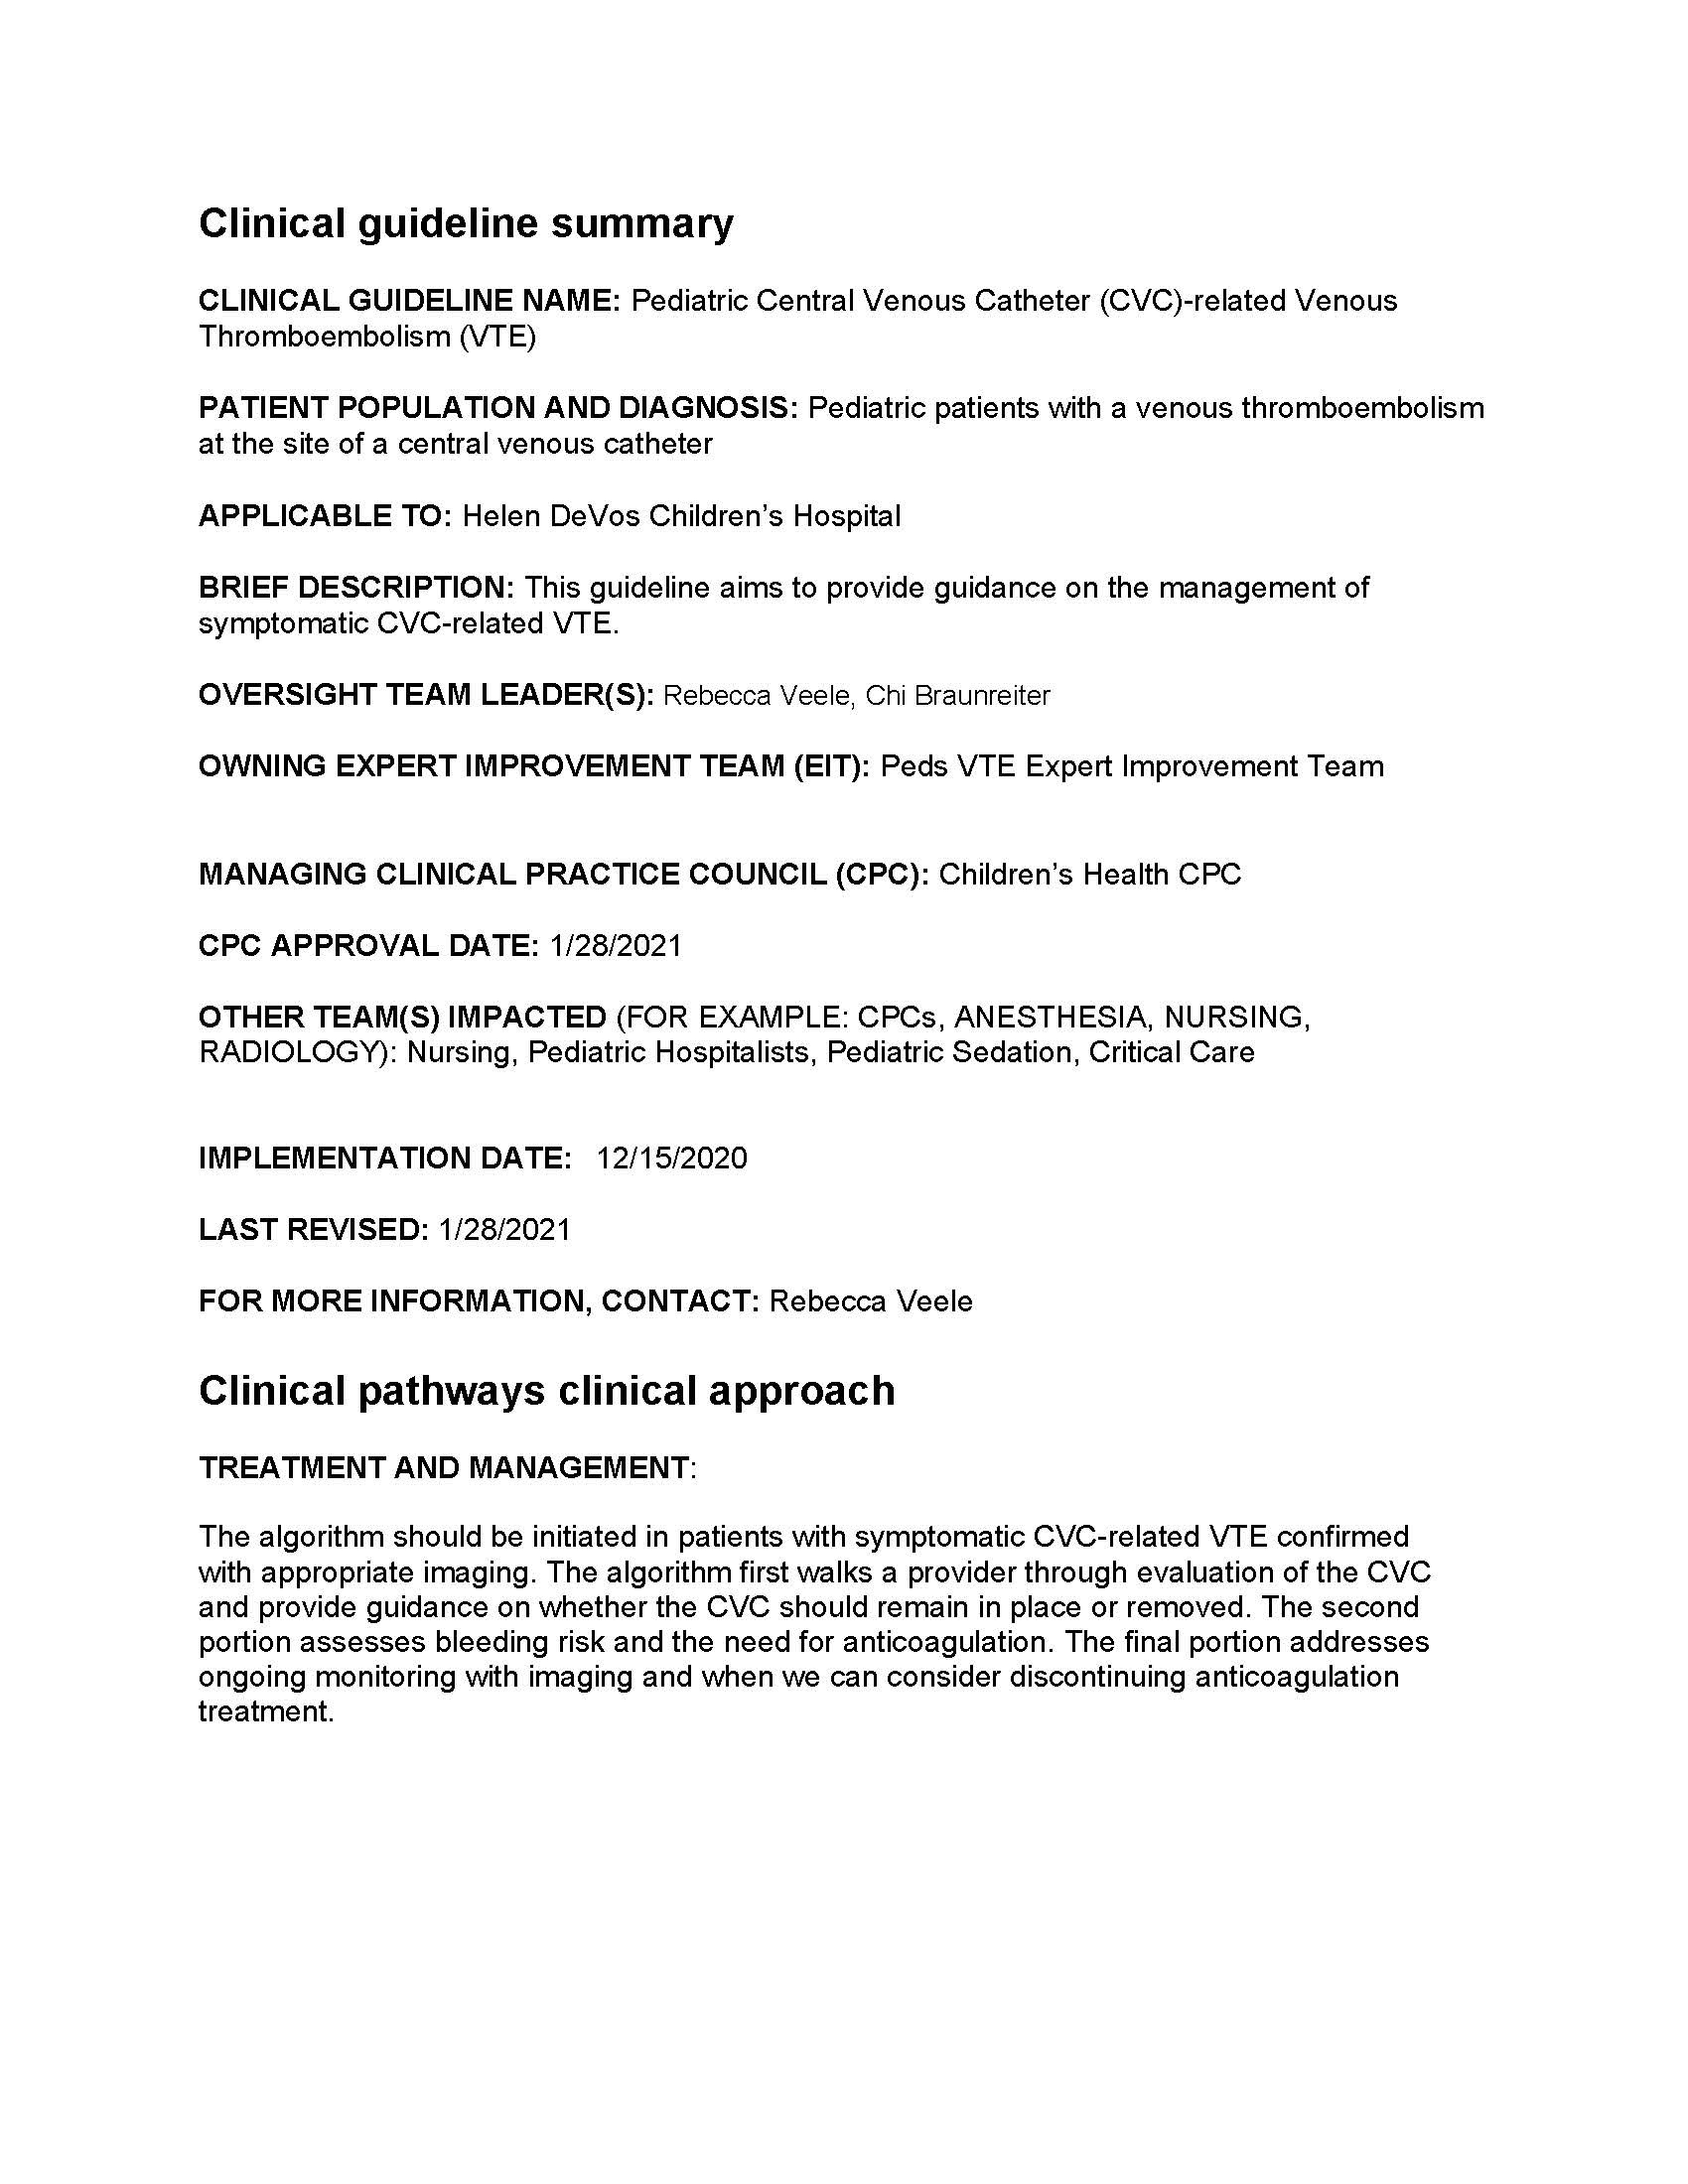 Clinical Guidelines Document Image 2